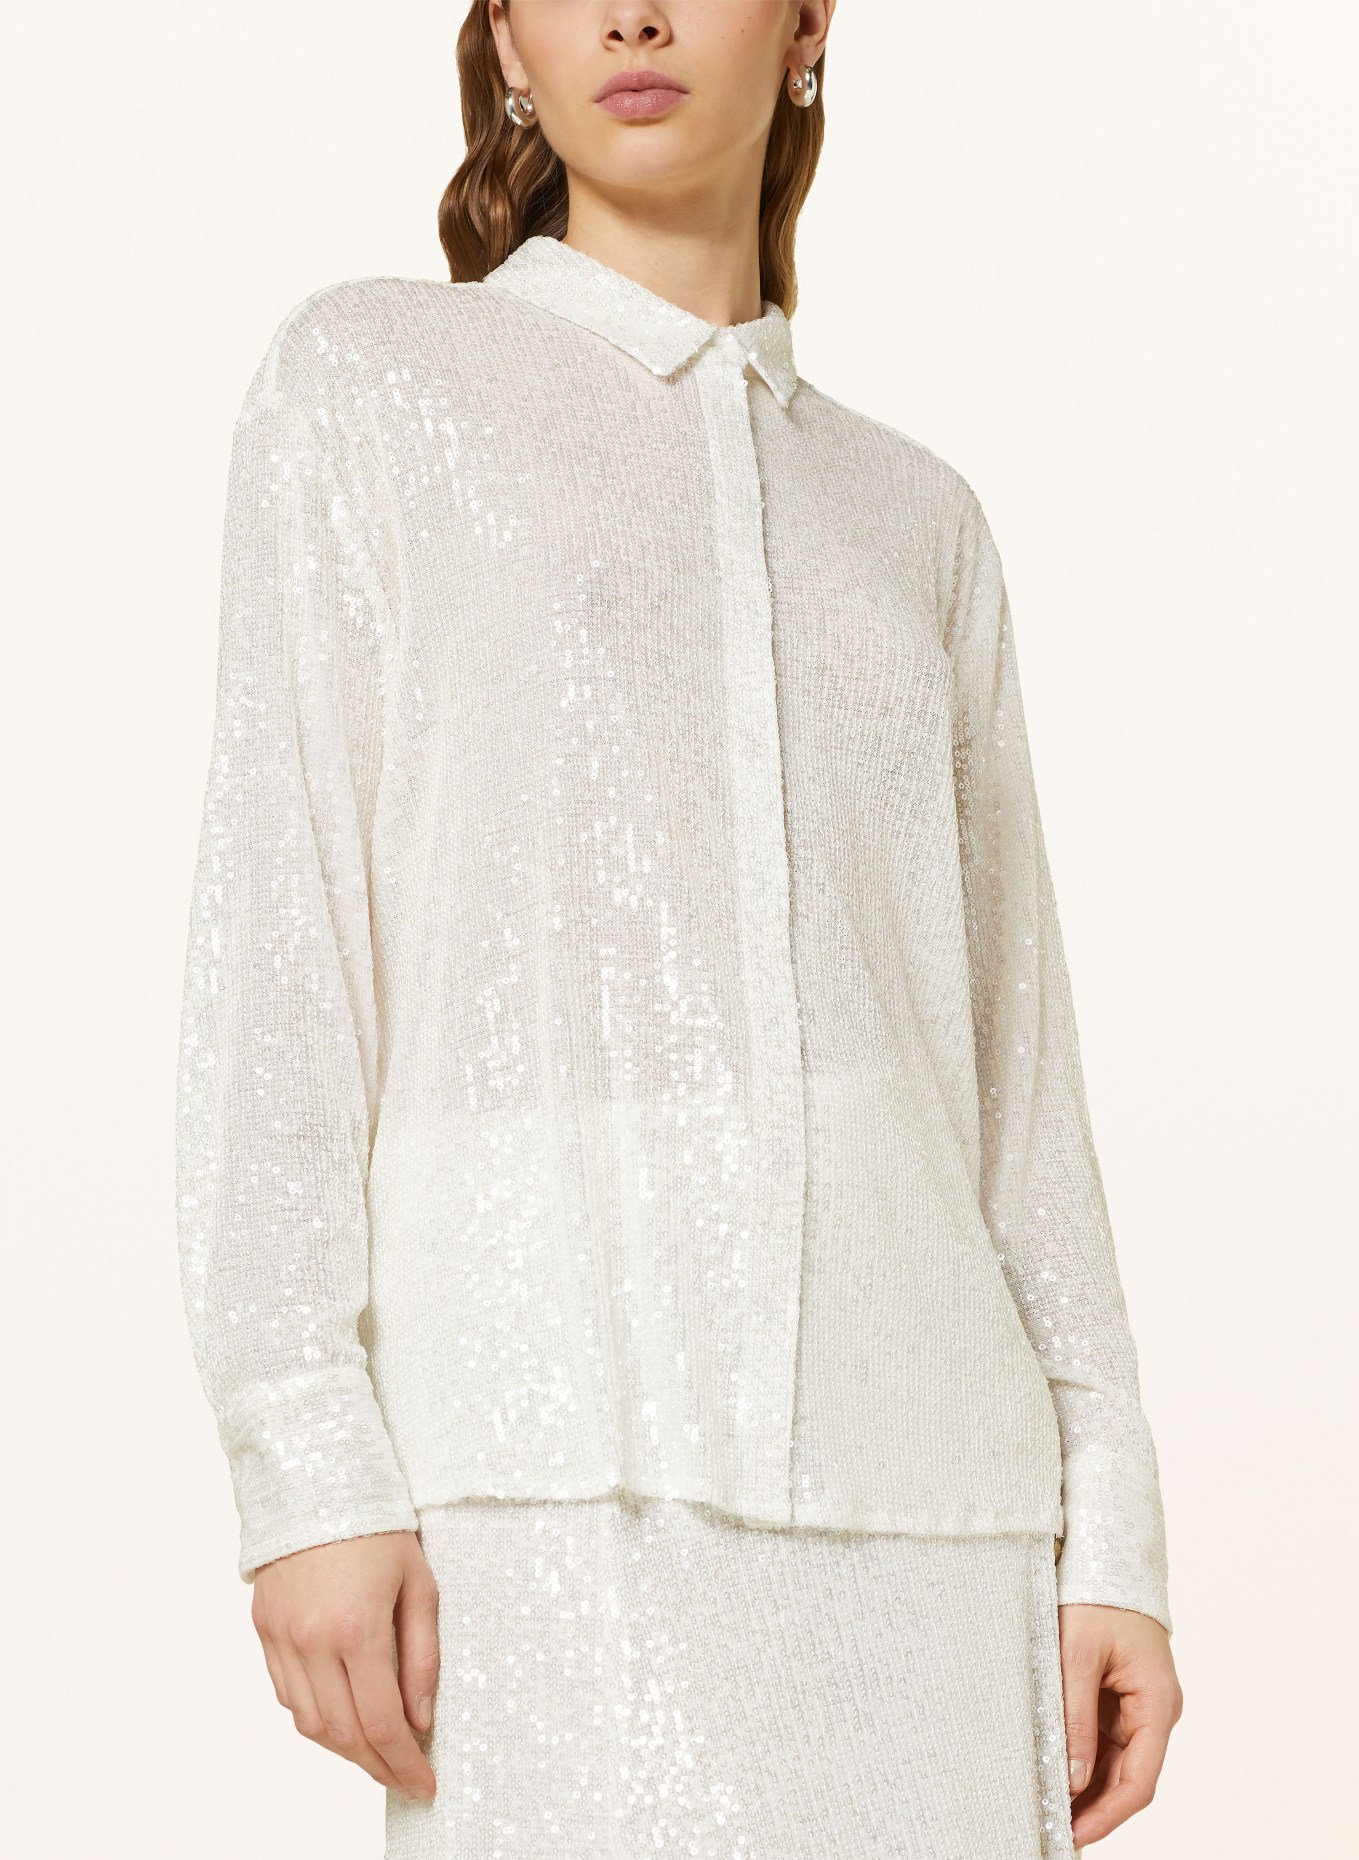 MRS & HUGS Shirt blouse with sequins, Color: WHITE (Image 4)